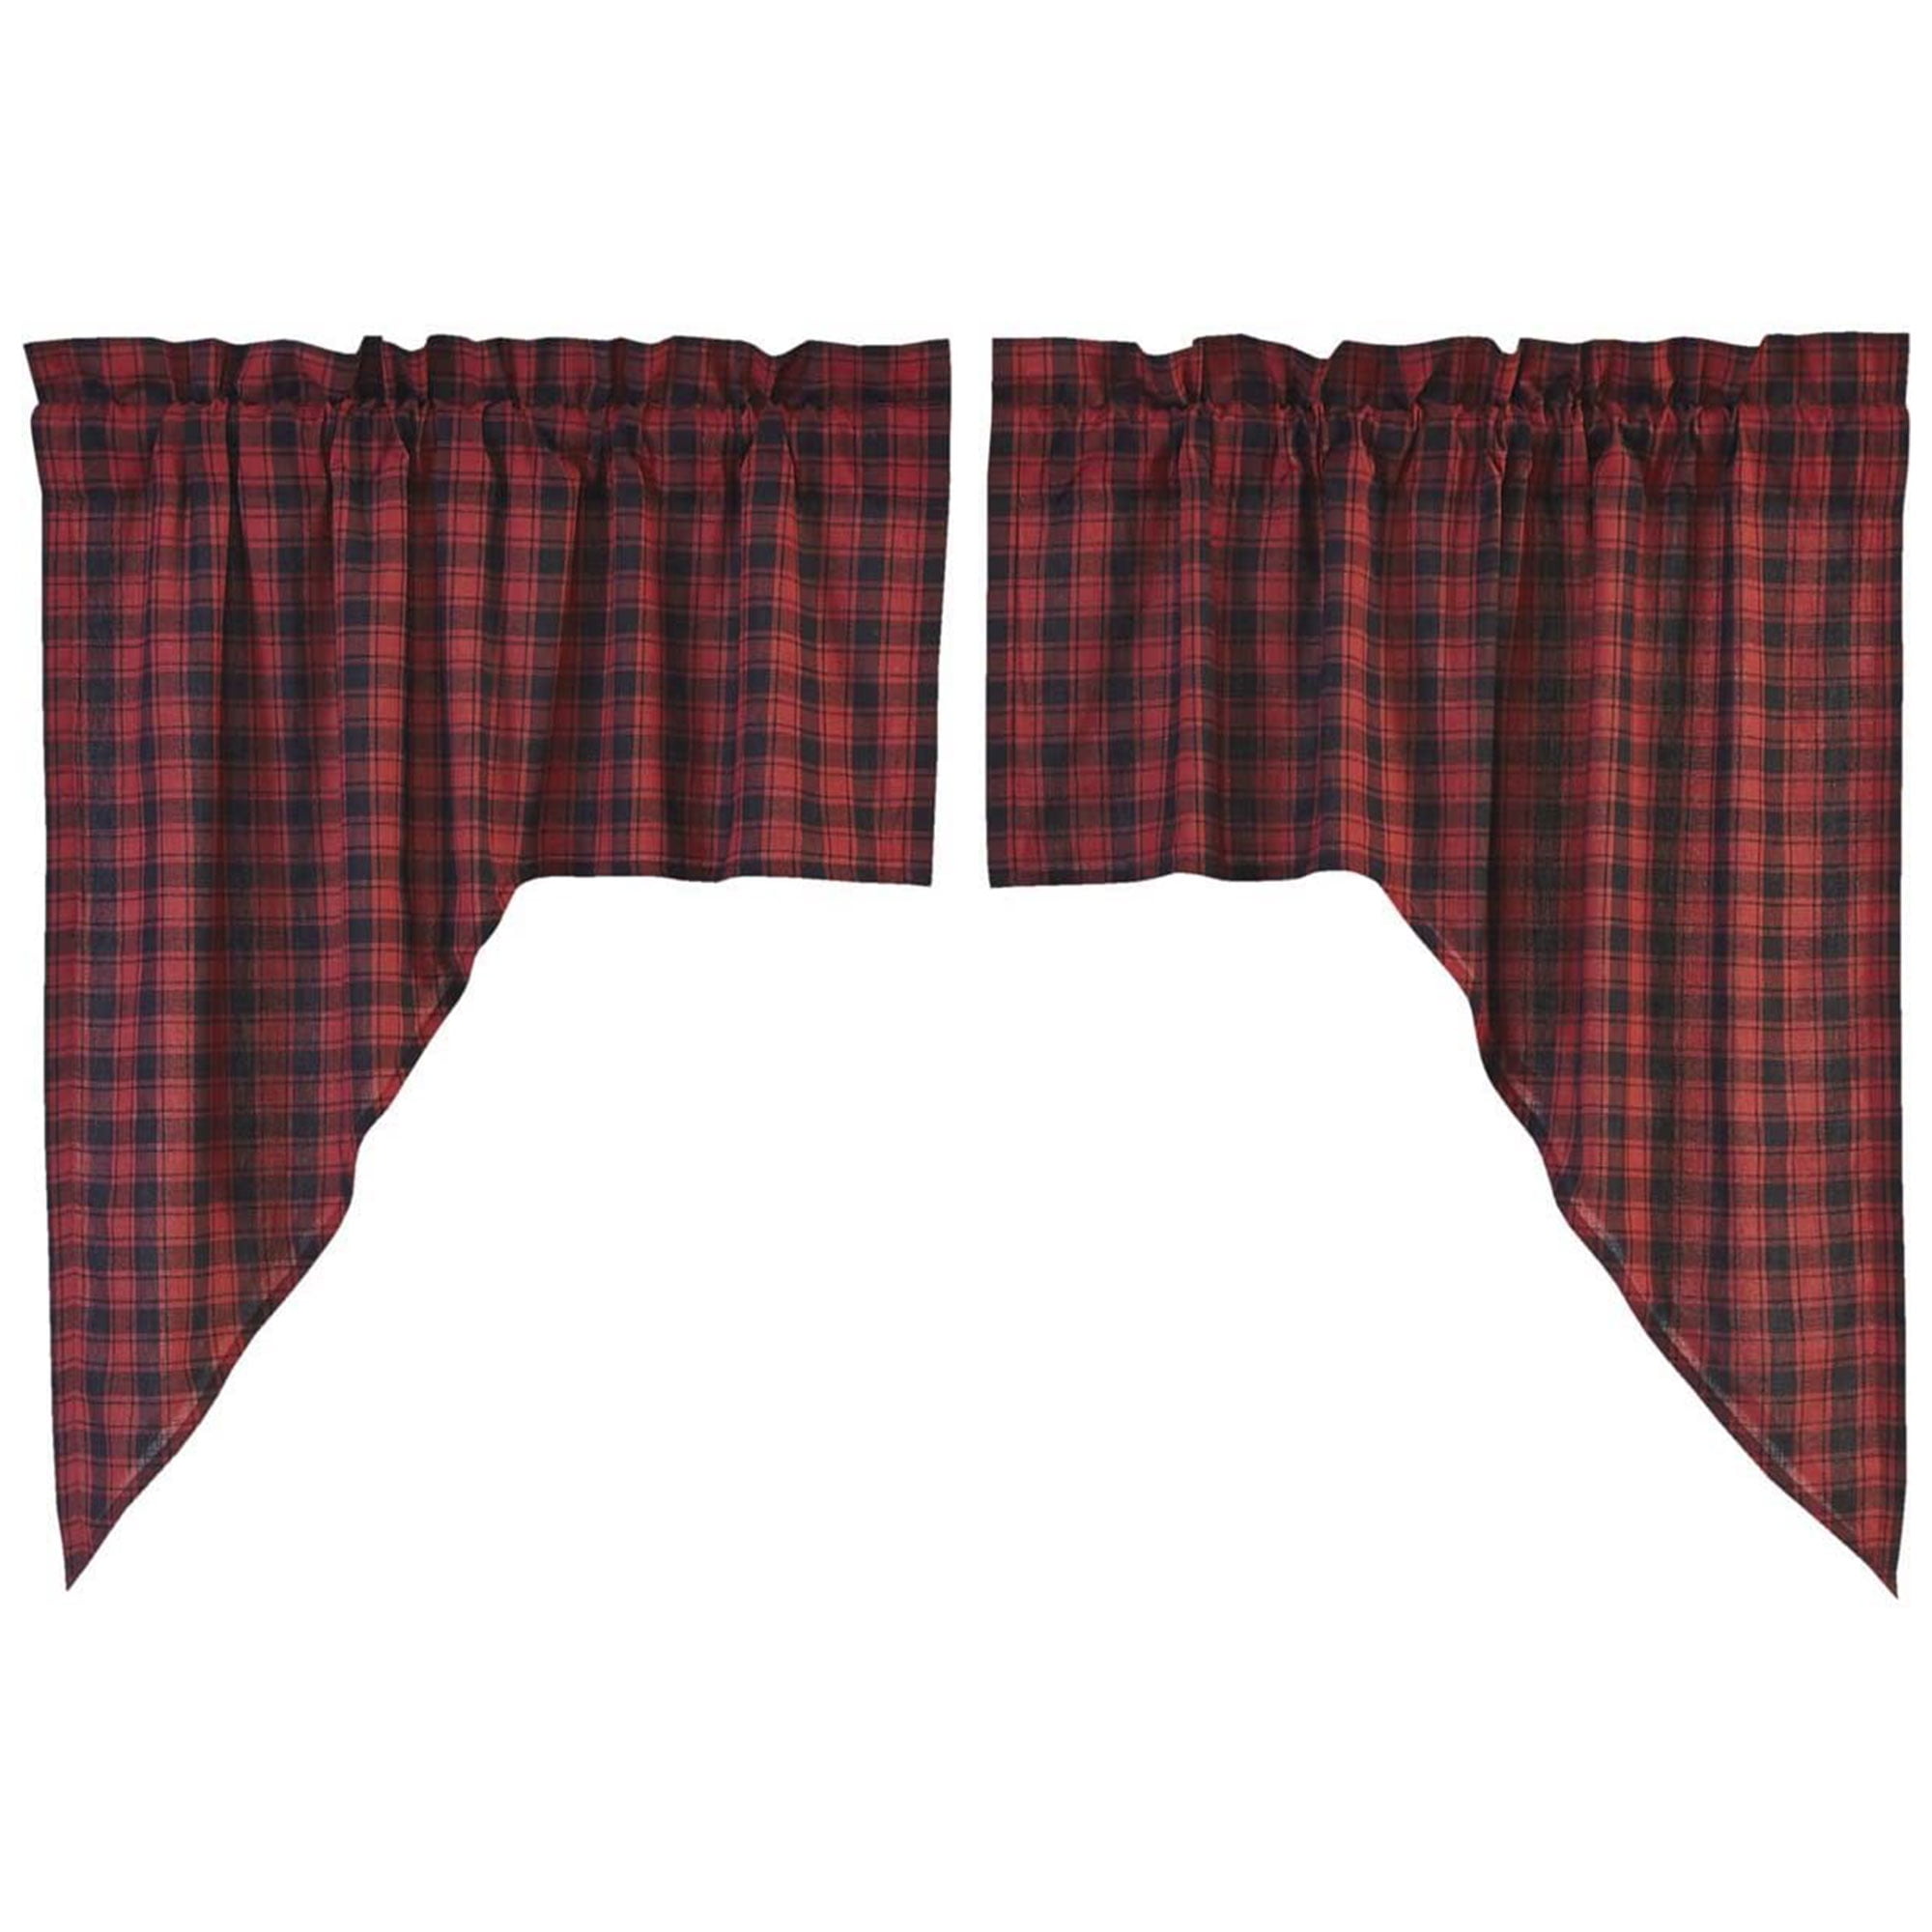 Cumberland PRAIRIE CURTAIN SET LINED COUNTRY Red and Black Plaid PRIMITIVE** 